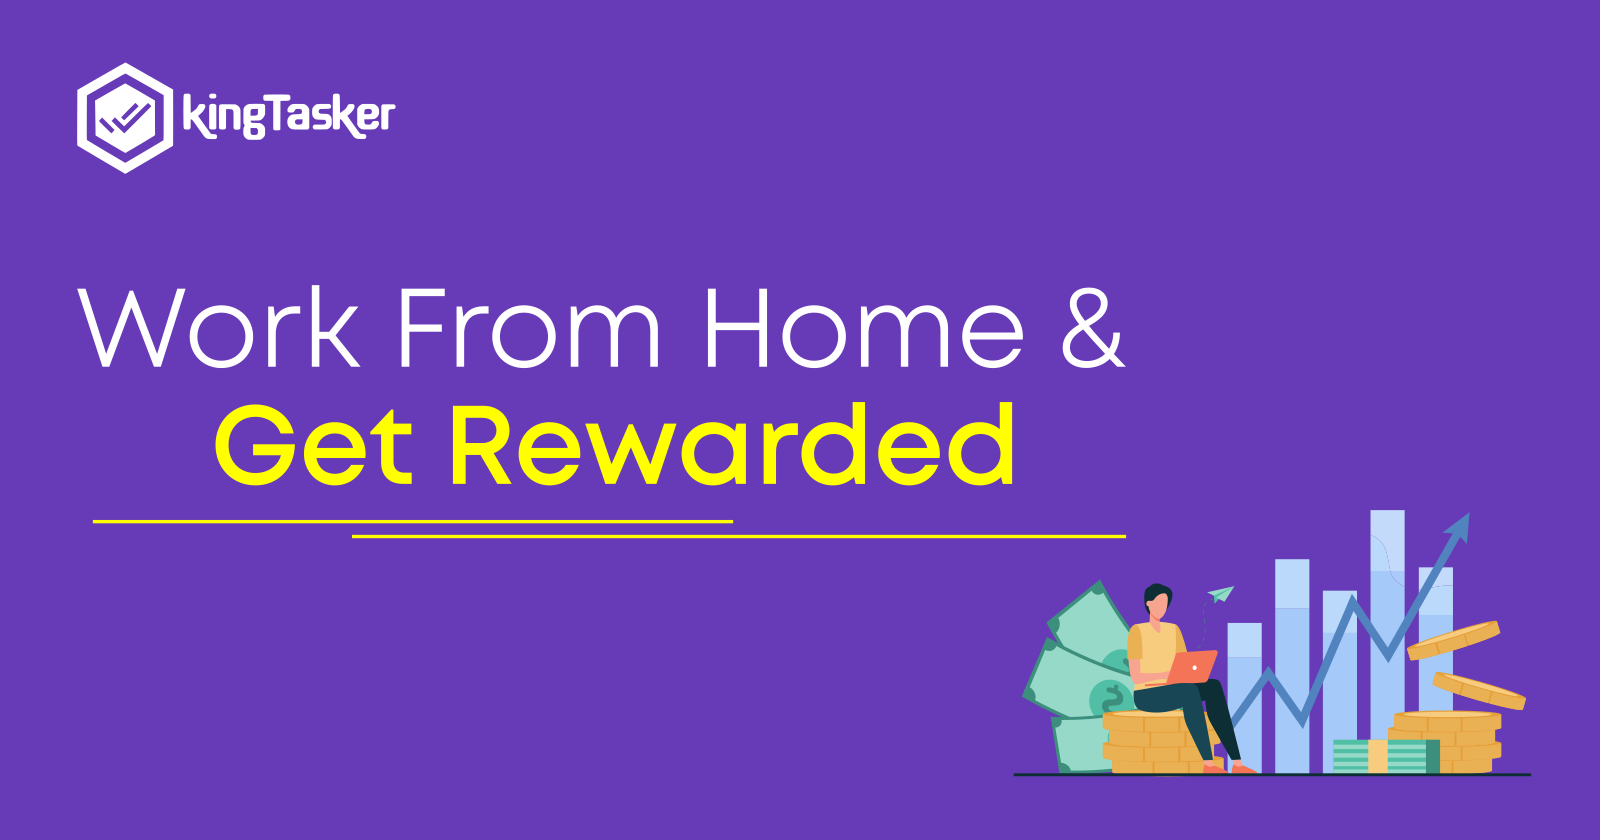 Work From Home & Get Rewarded